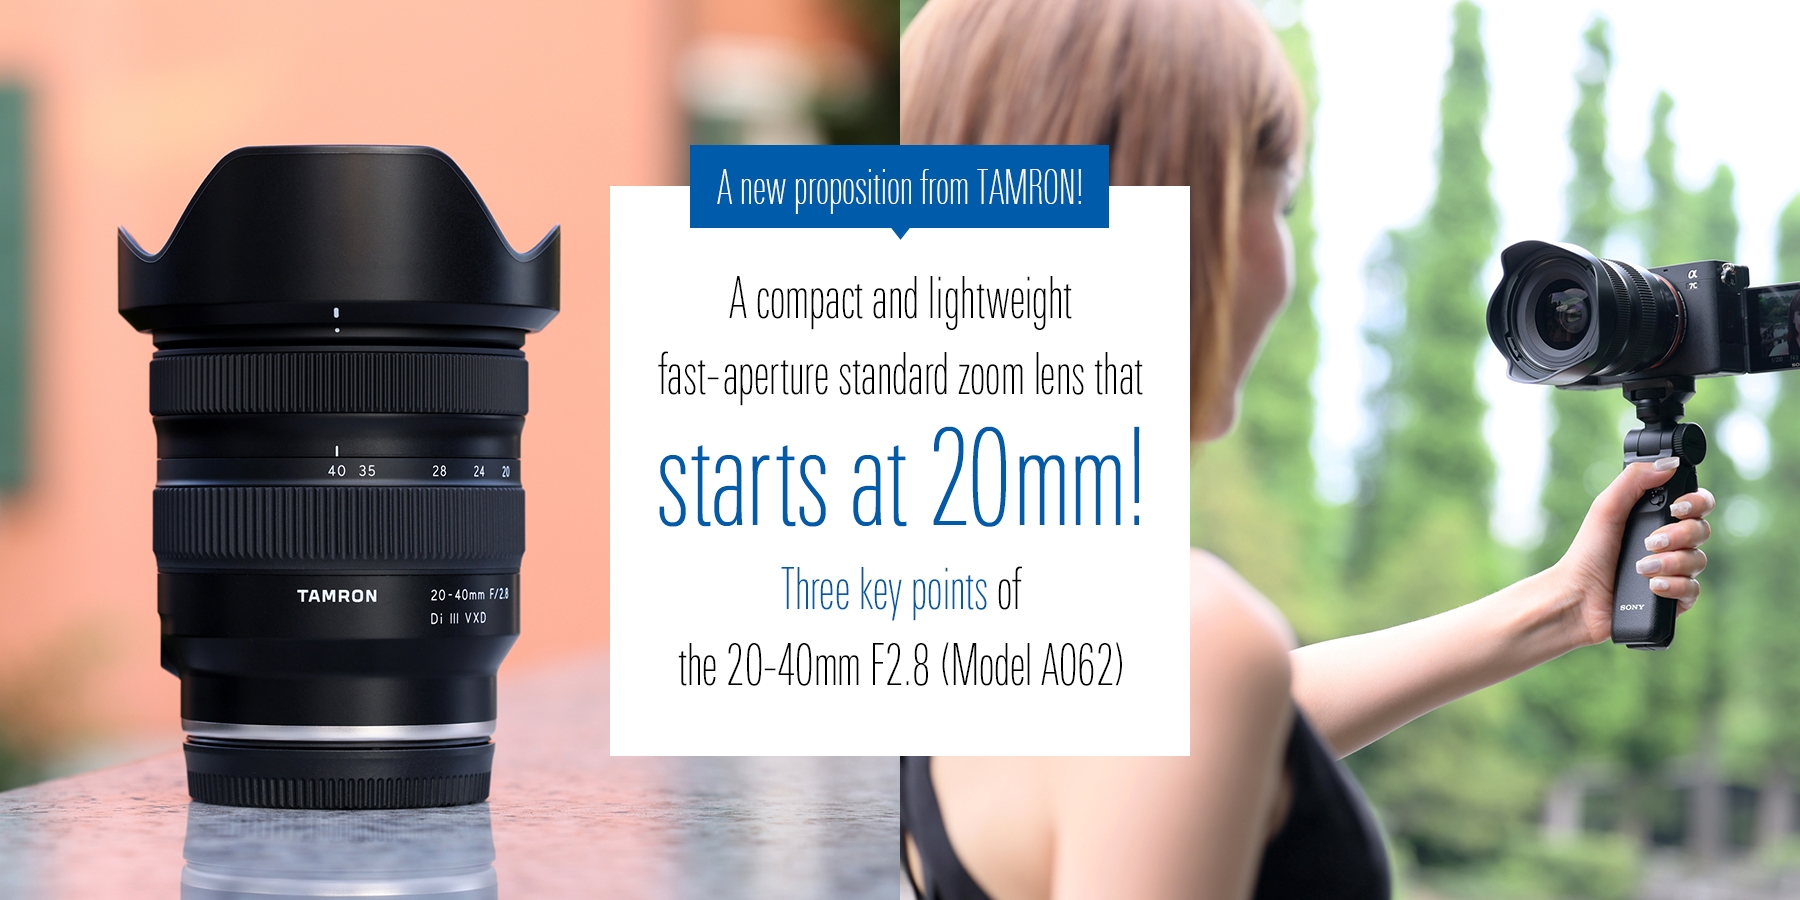 3 key points of 20-40mm F2.8 (Model A062), a compact fast-aperture